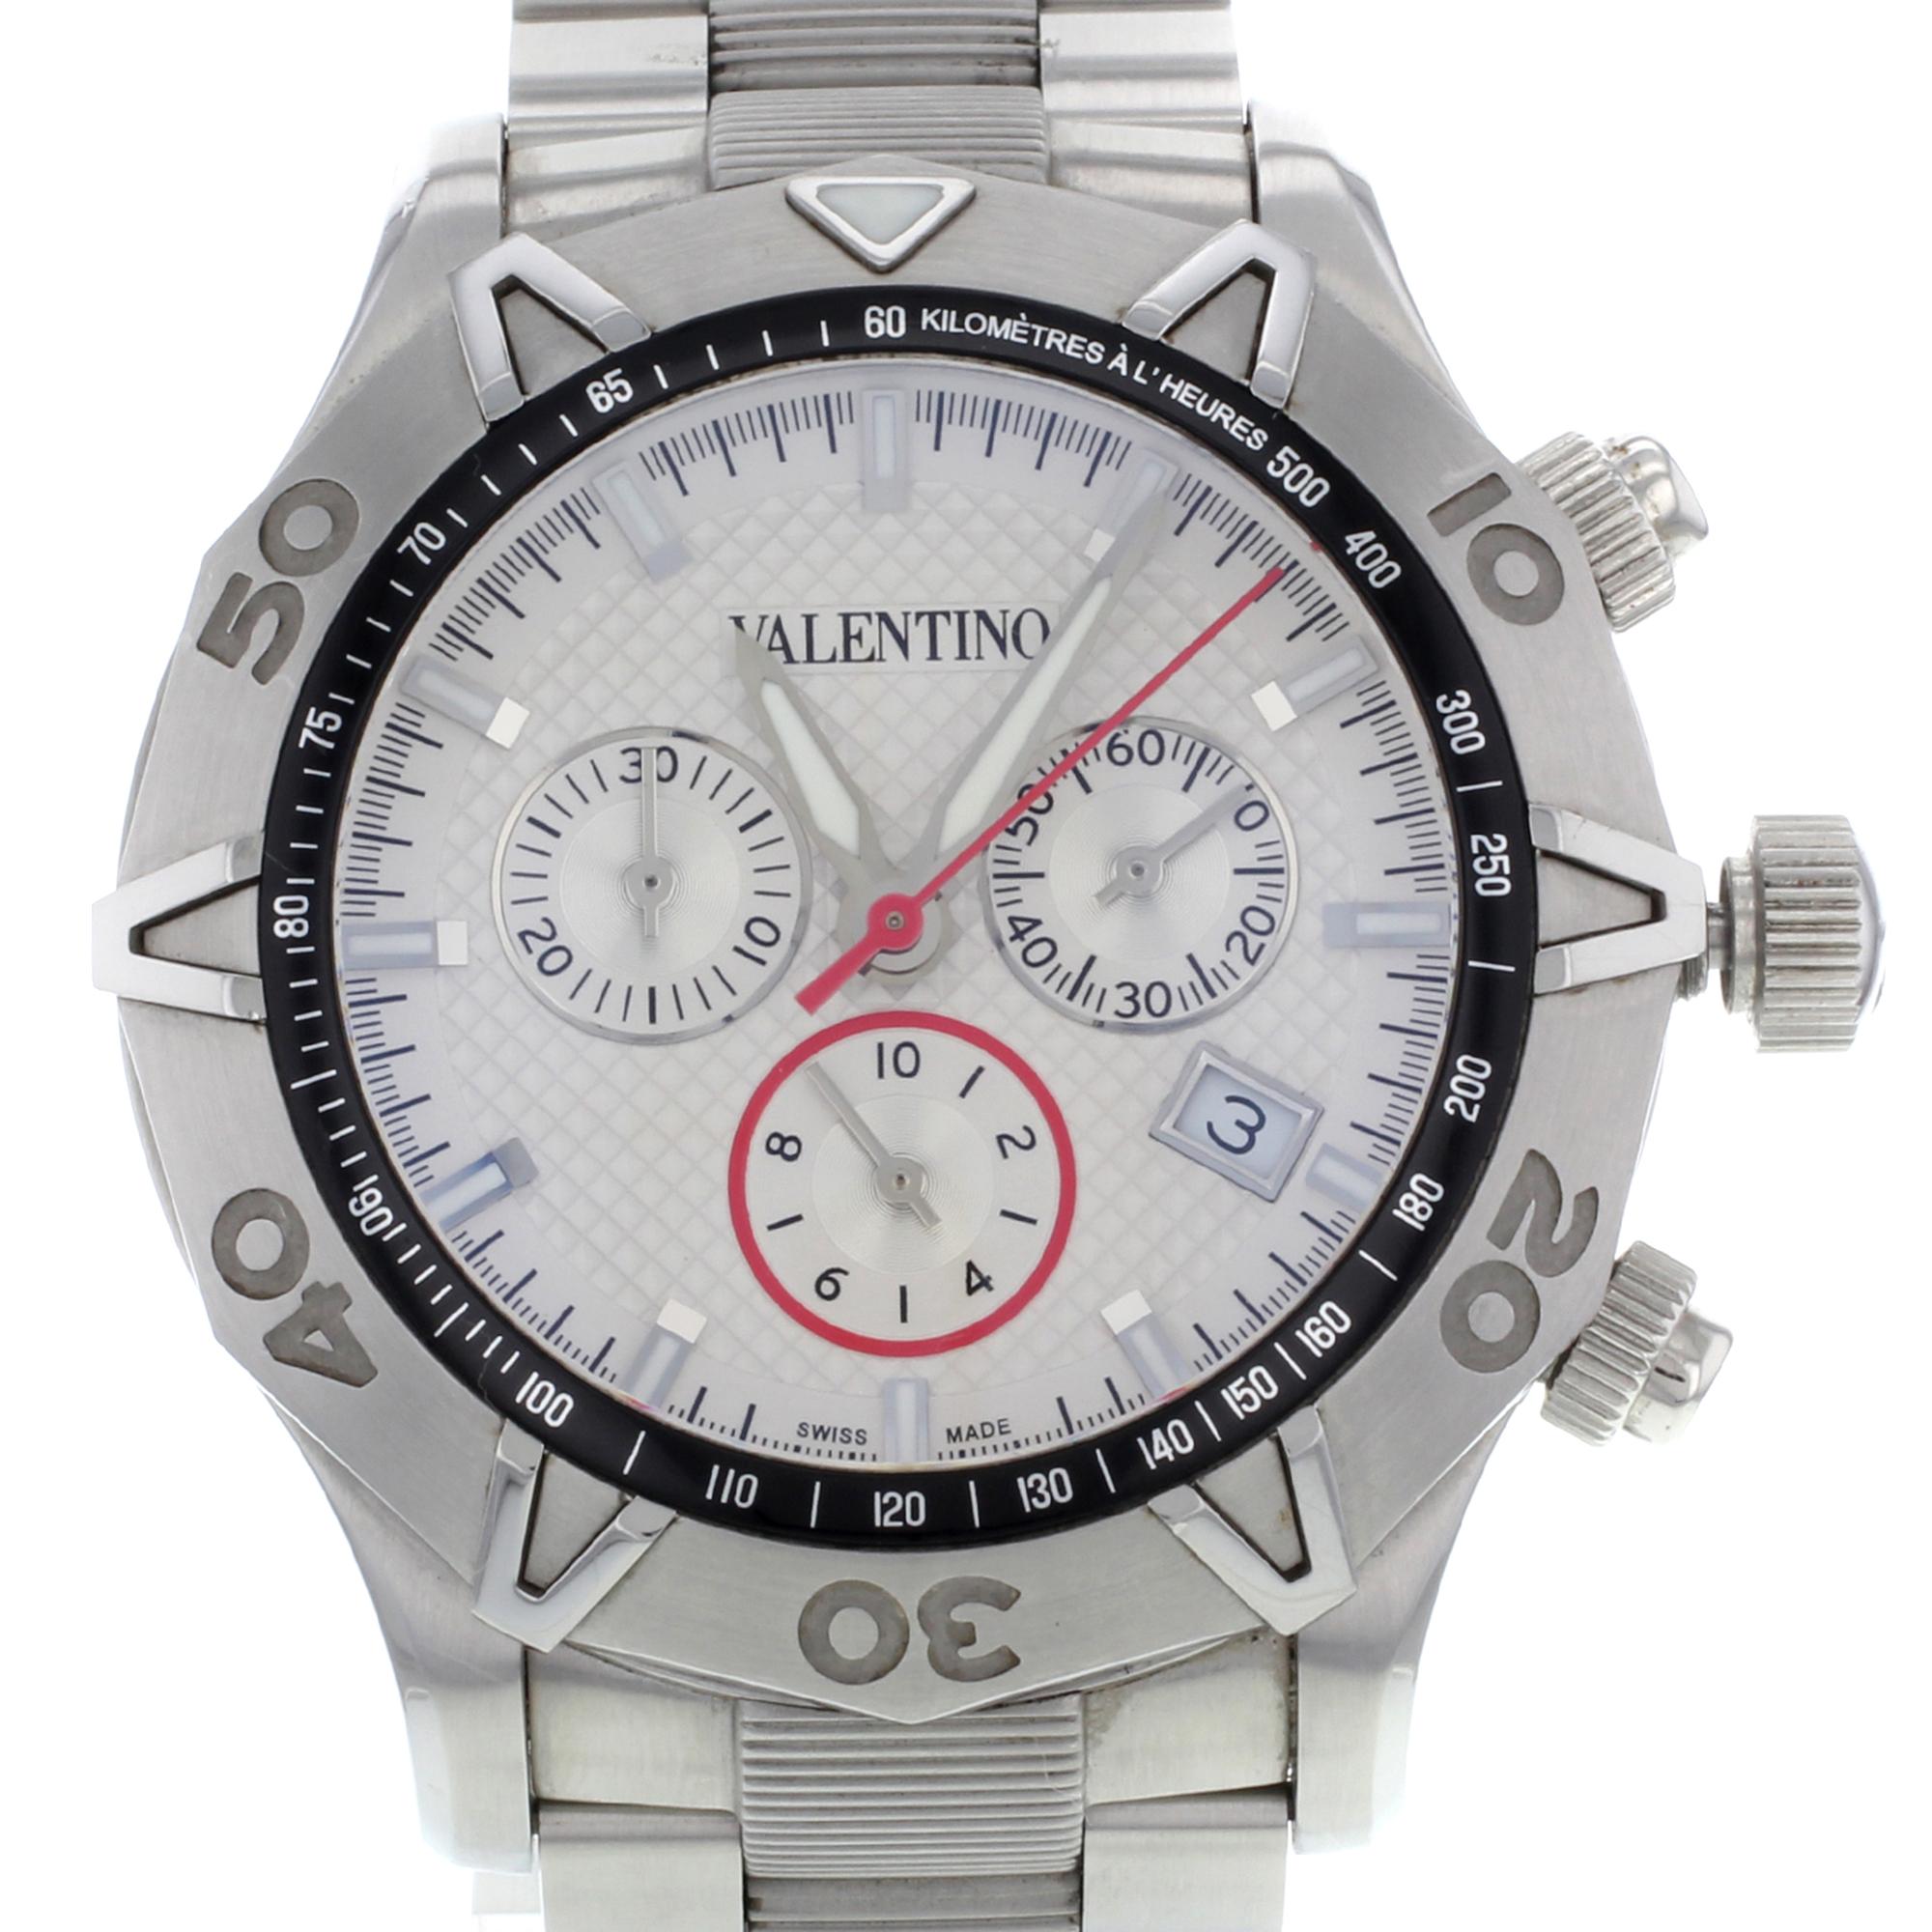 This pre-owned Valentino  Homme  V40LCQ9902-S099 is a beautiful men's timepiece that is powered by a quartz movement which is cased in a stainless steel case. It has a round shape face, chronograph, date, small seconds subdial dial, and has hand